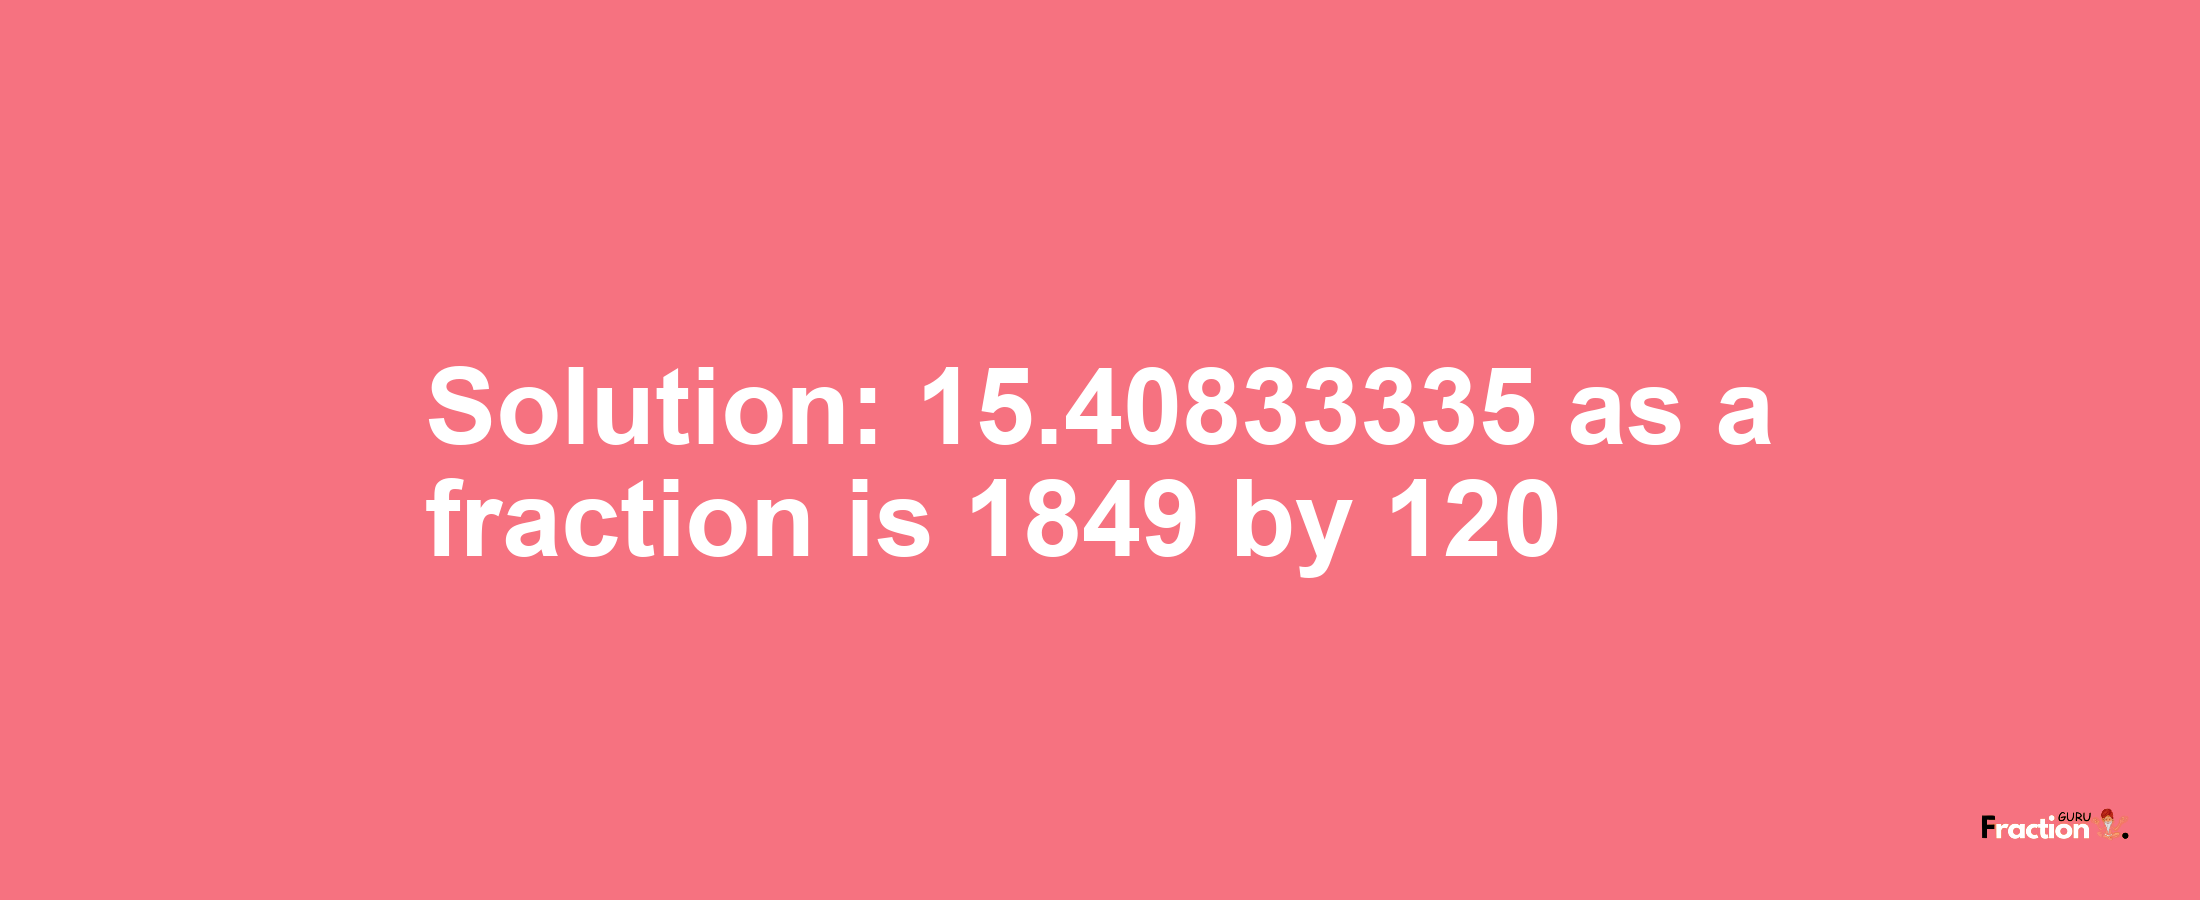 Solution:15.40833335 as a fraction is 1849/120